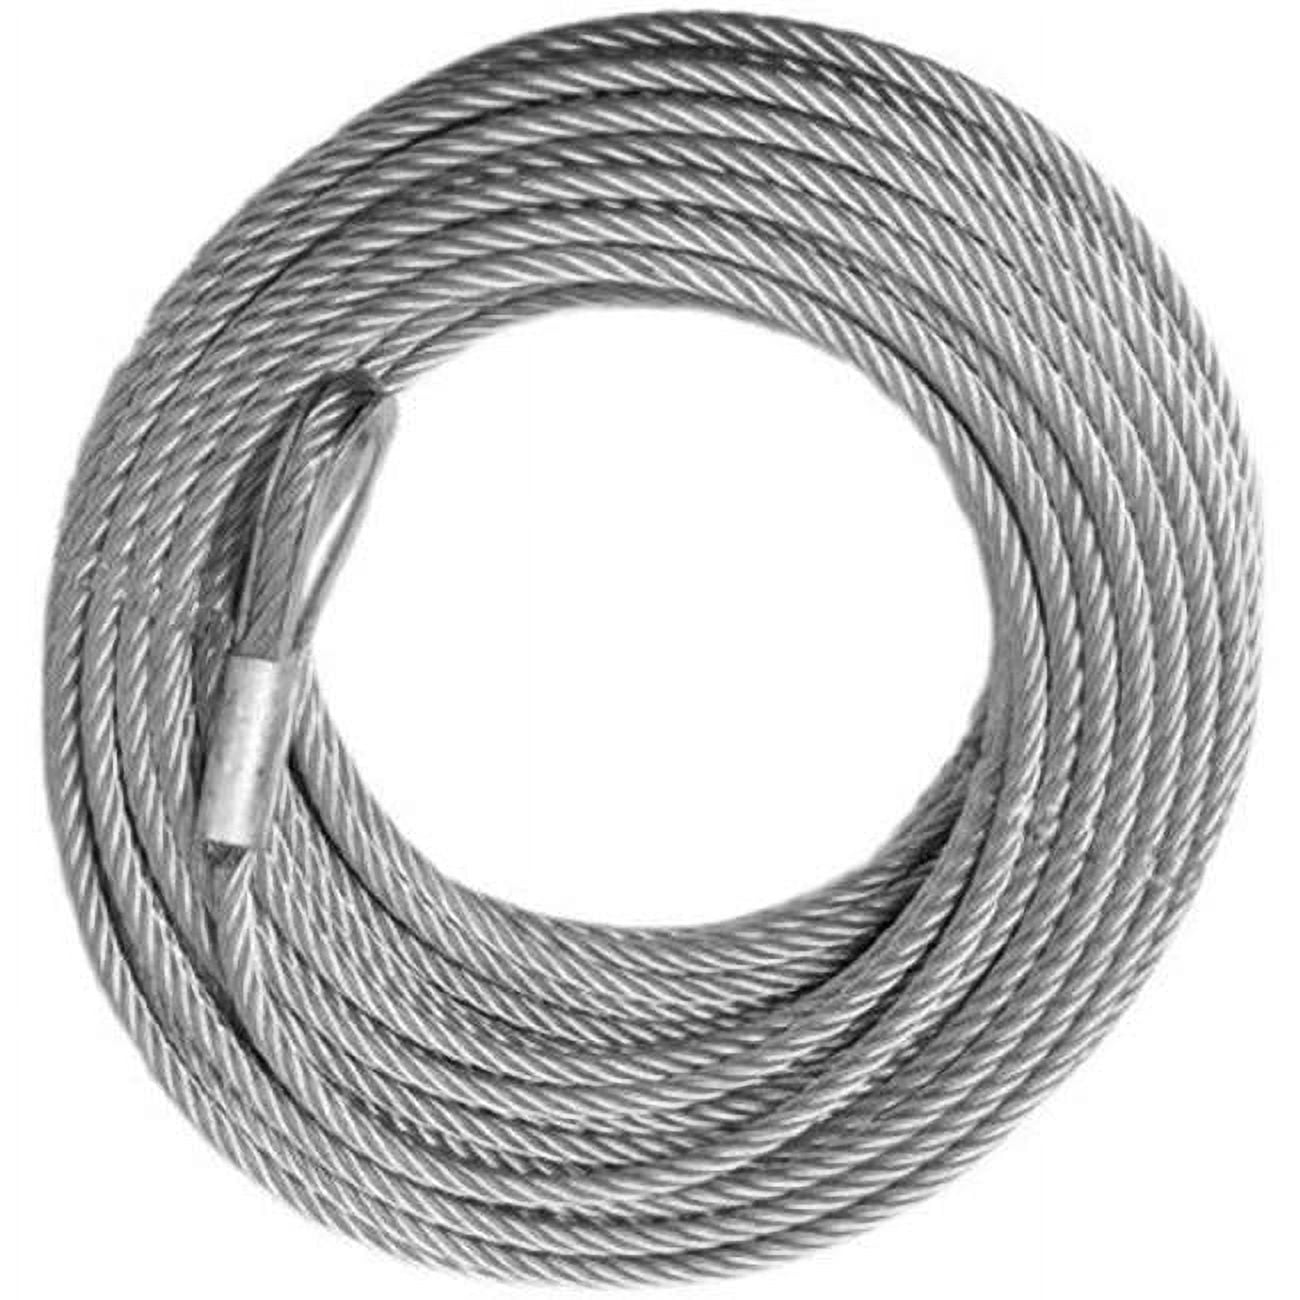 Wrecker Replacement Cable - 7/16 X 80 Galvanized (17 600lb Strength) (vehicle Recovery)